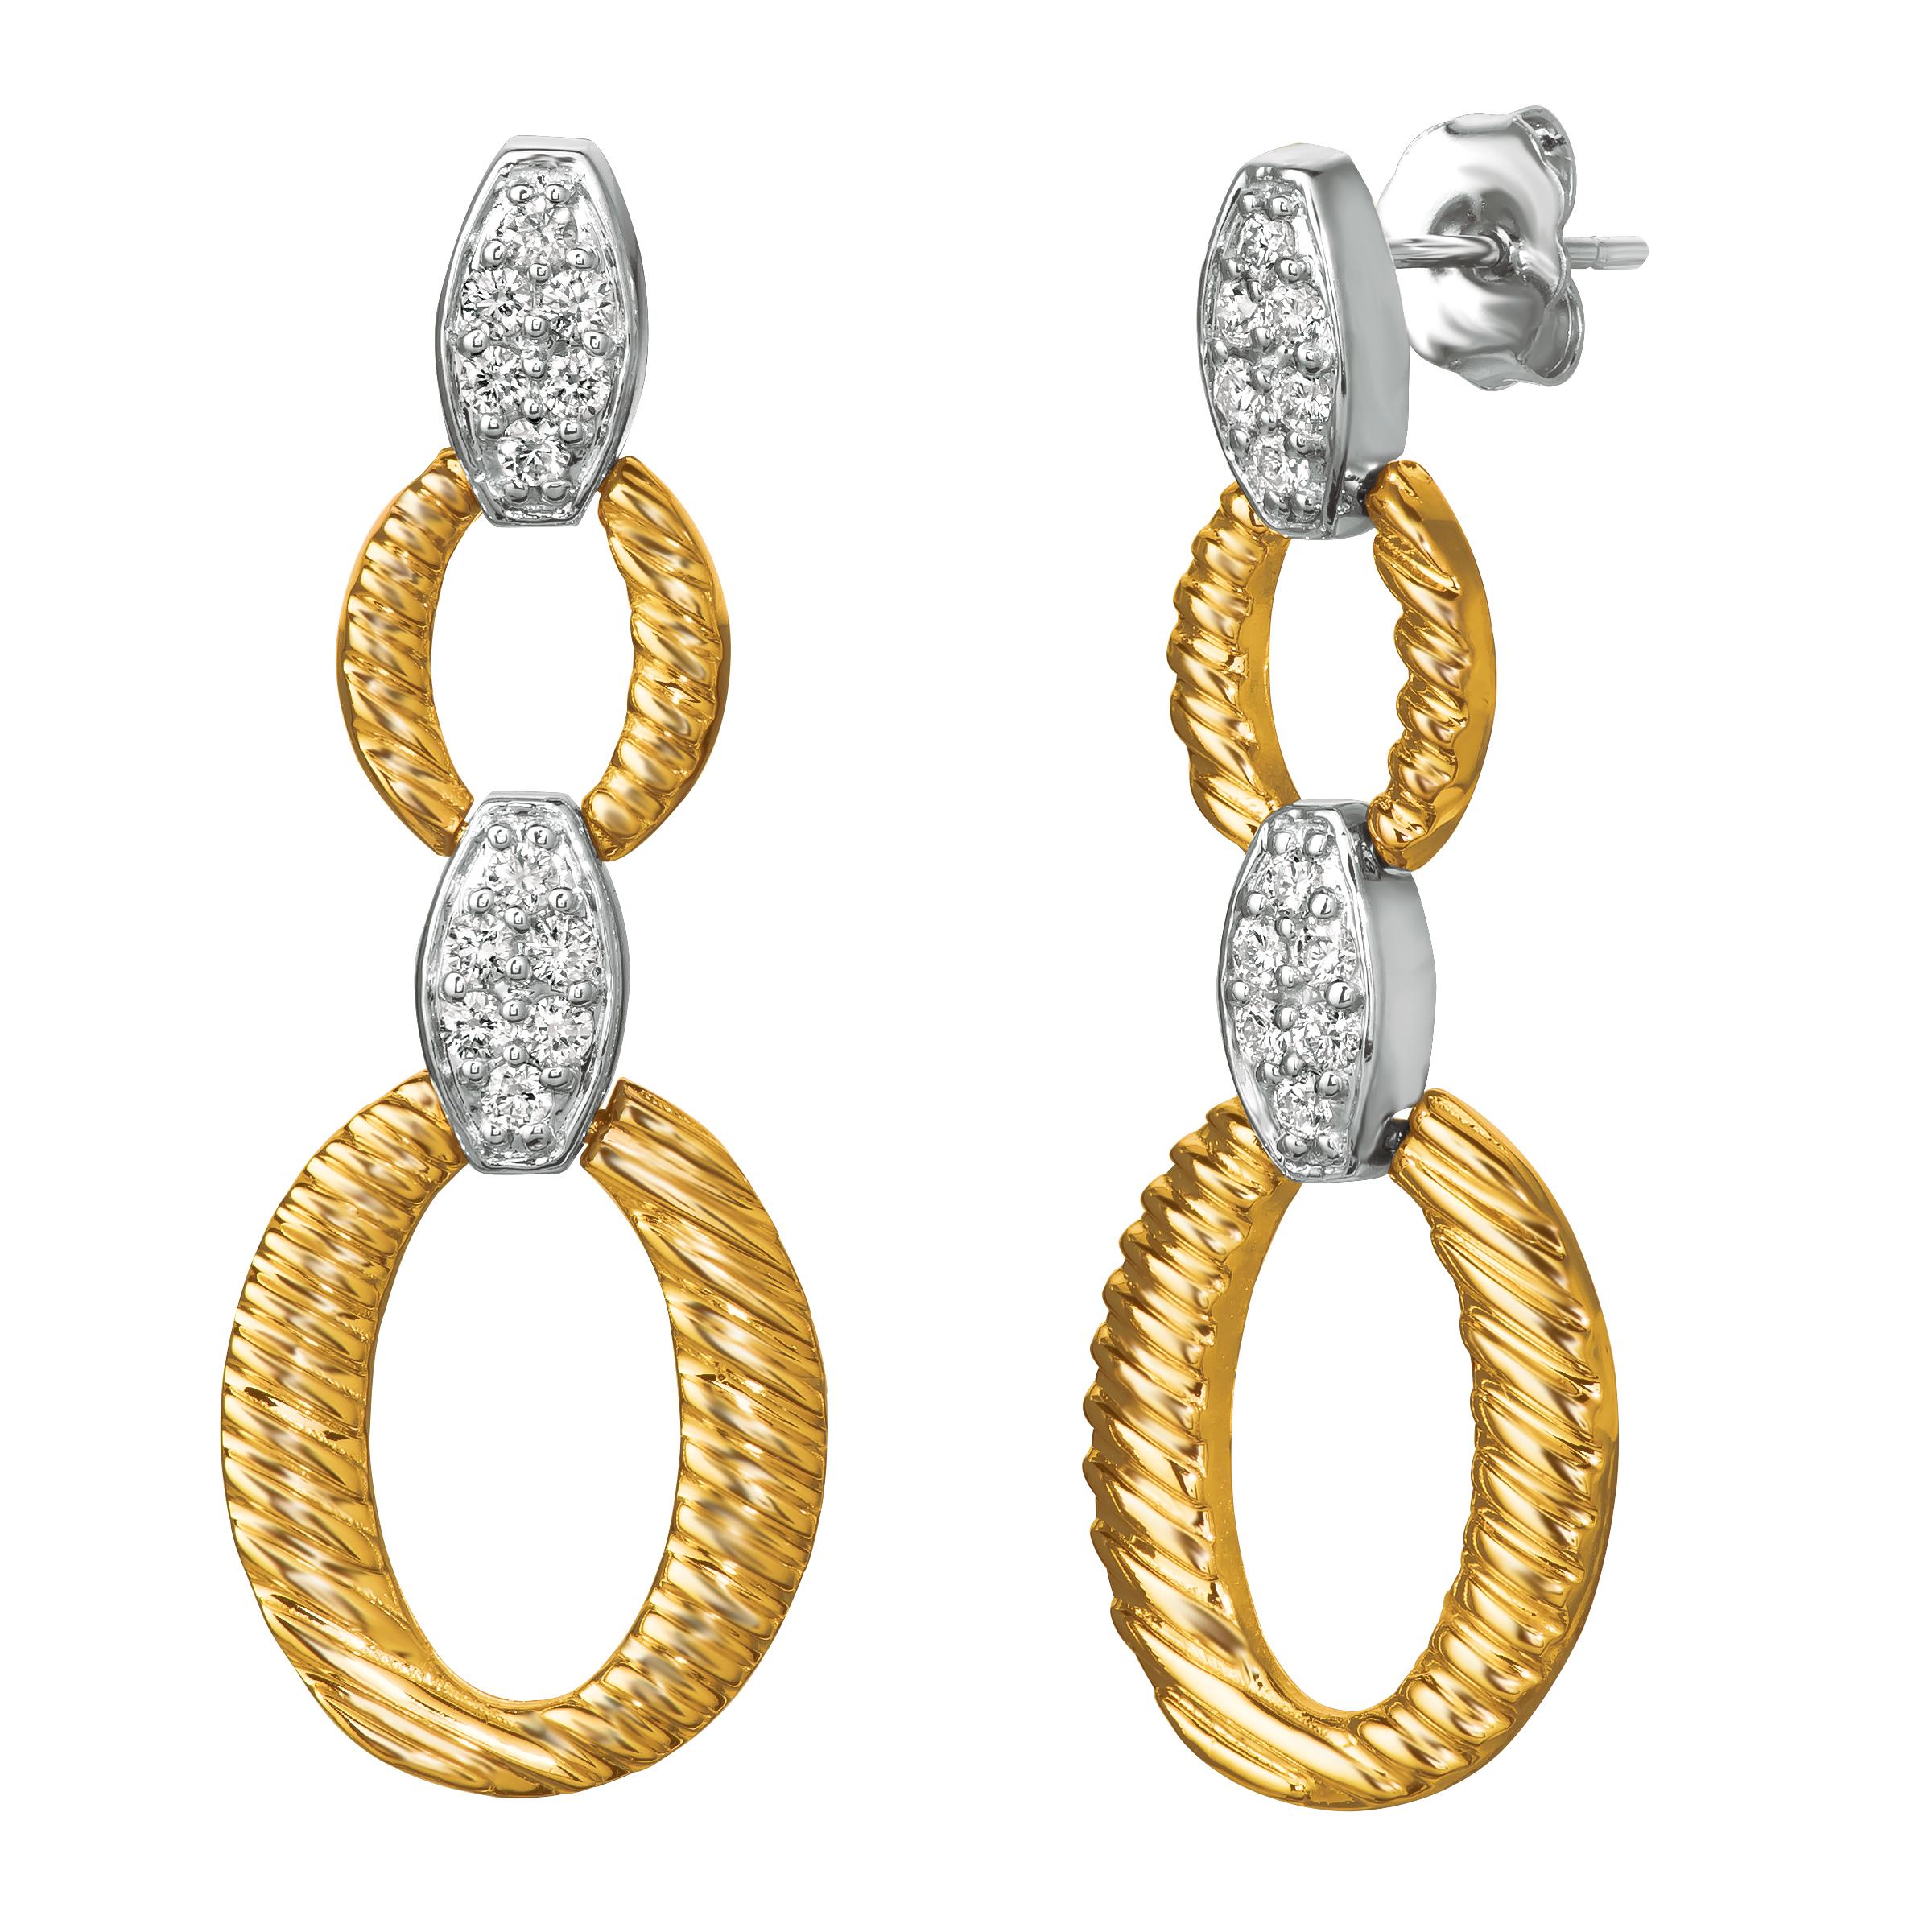 0.50 Carat Natural Diamond Earrings G SI 14K White and Yellow Gold

100% Natural, Not Enhanced in any way Round Cut Diamond Earrings
0.50CT
G-H 
SI  
14K White and Yellow Gold,  5.4 grams, Pave set
1 7/16 inch in height, 1/2 inch in width
24